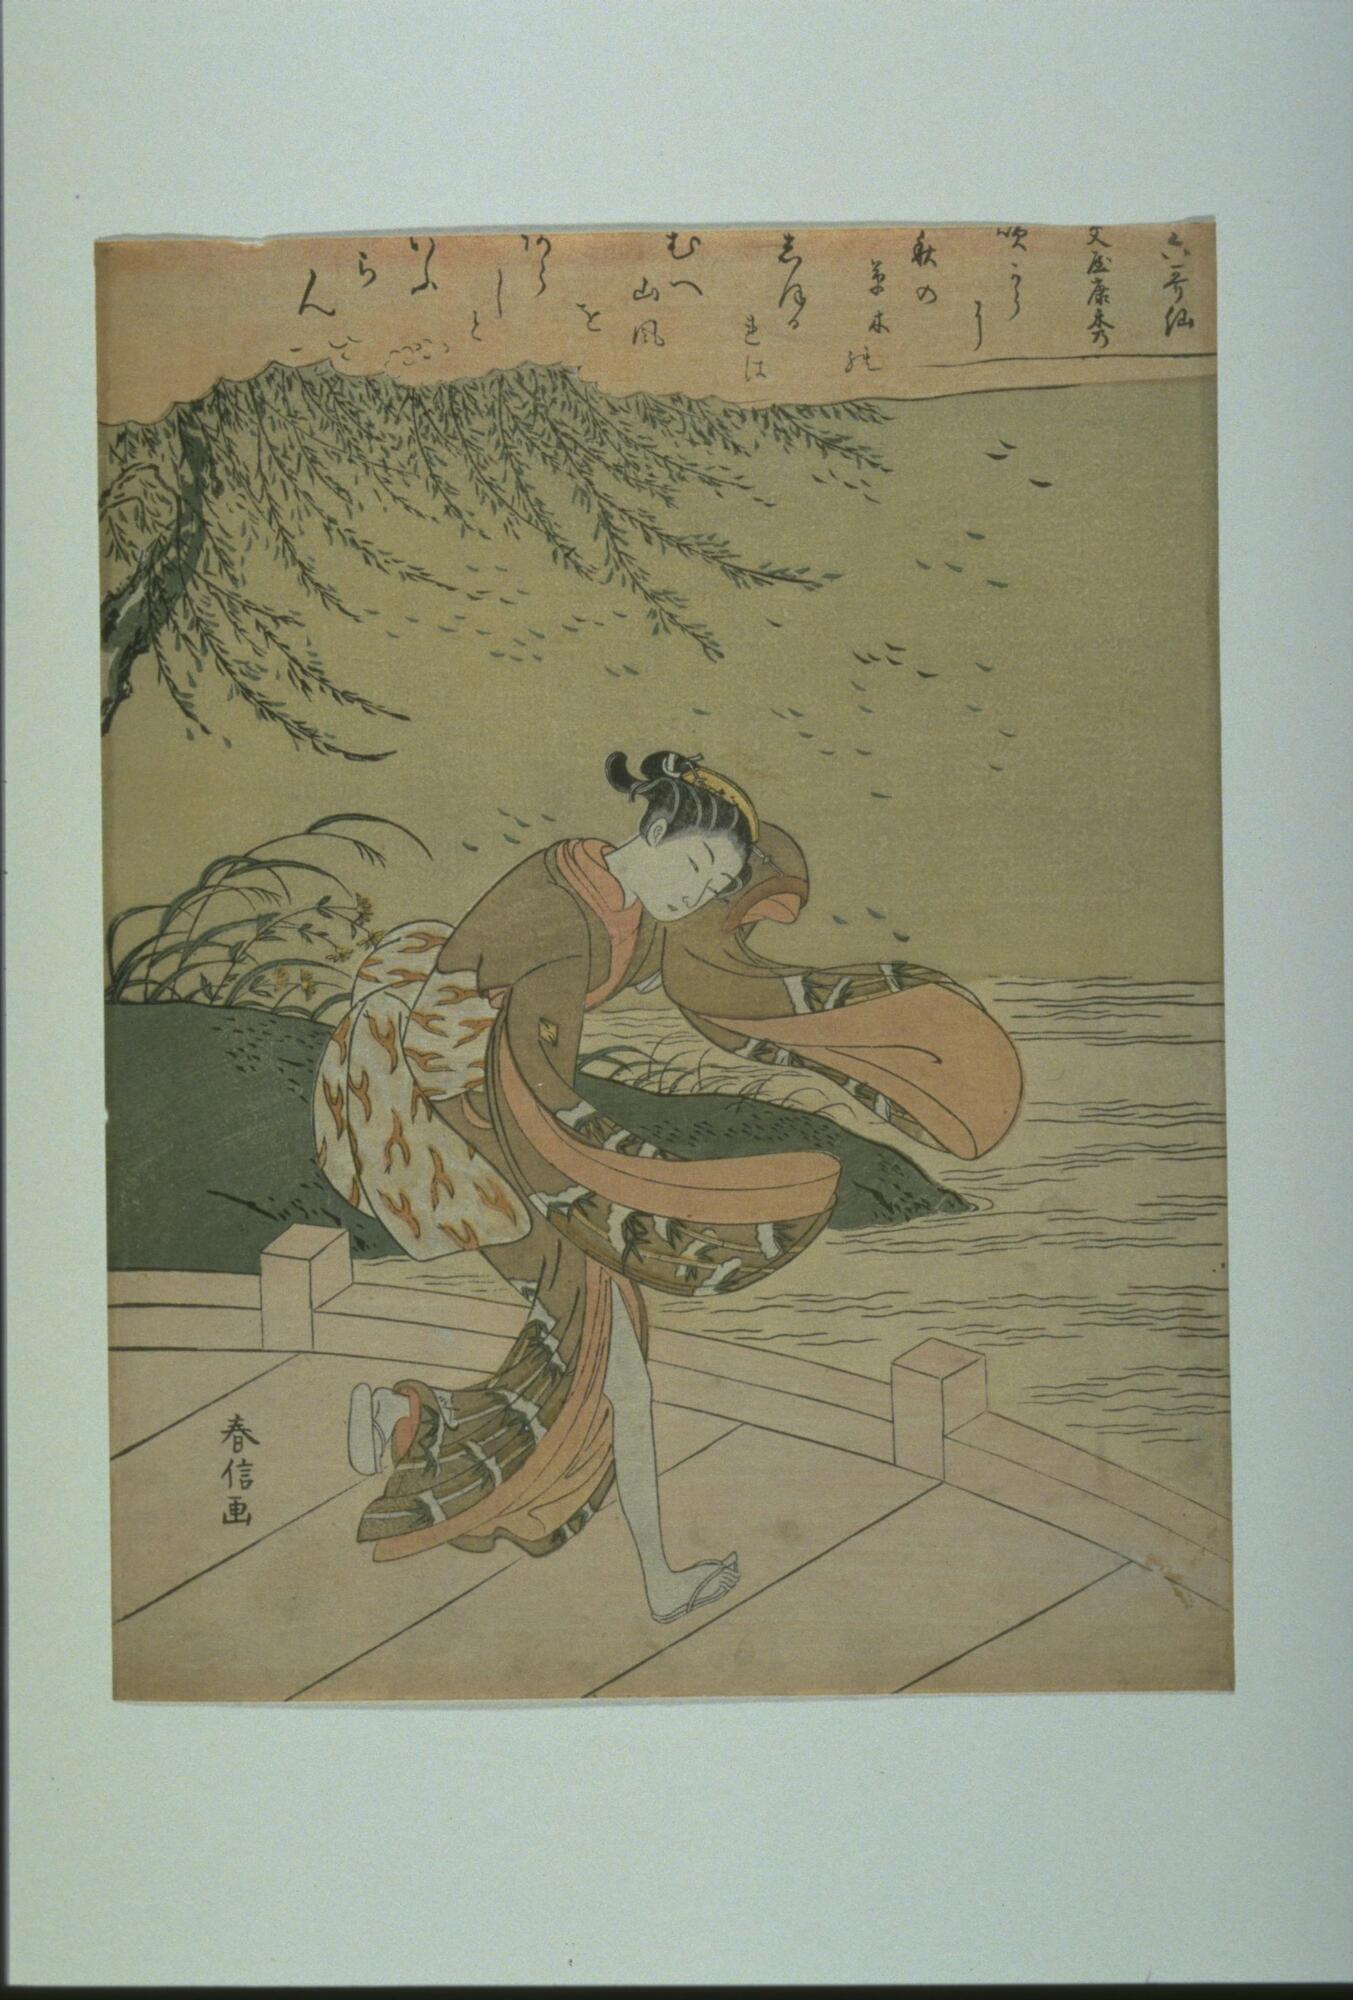 A young woman hurries across a bridge, using one of her sleeves to shield her head from the strong wind.  Plants around her bend in the force of the wind, and tree branches lose their leaves.  An Uta poem by Bunya-no-Yasuhide graces the top register.